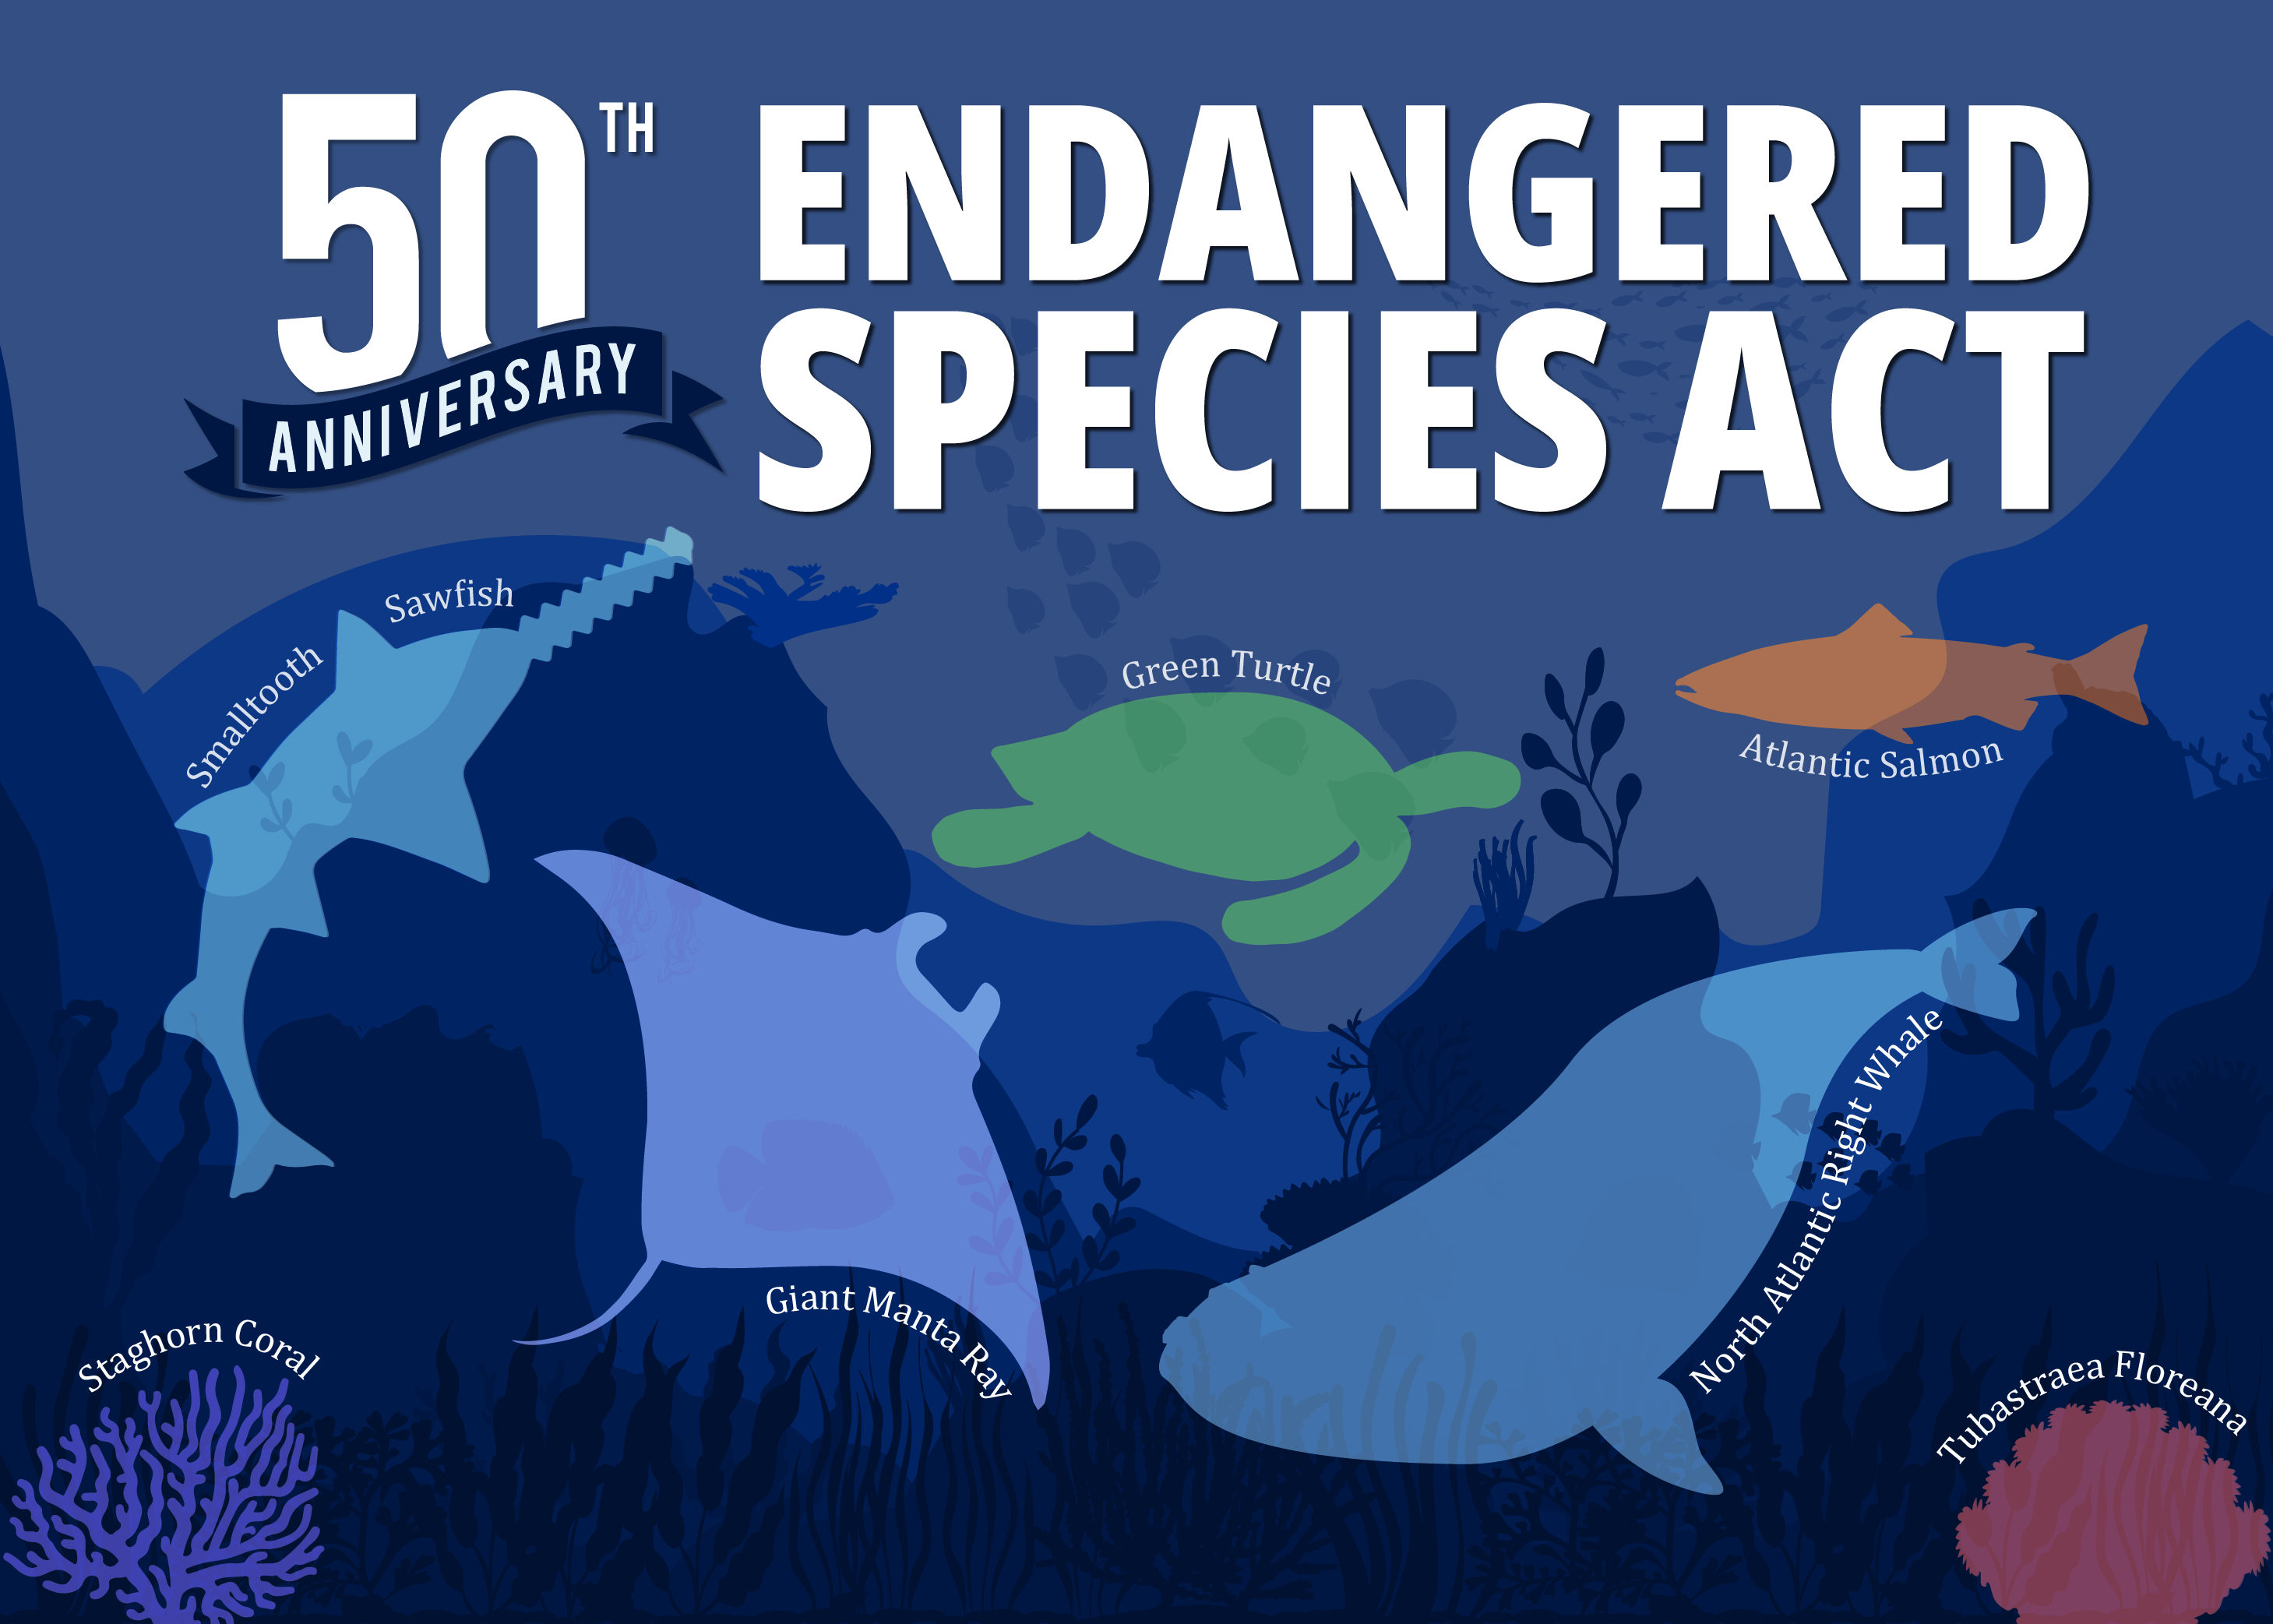 After 50 years of conservation, what’s next for the Endangered Species Act?